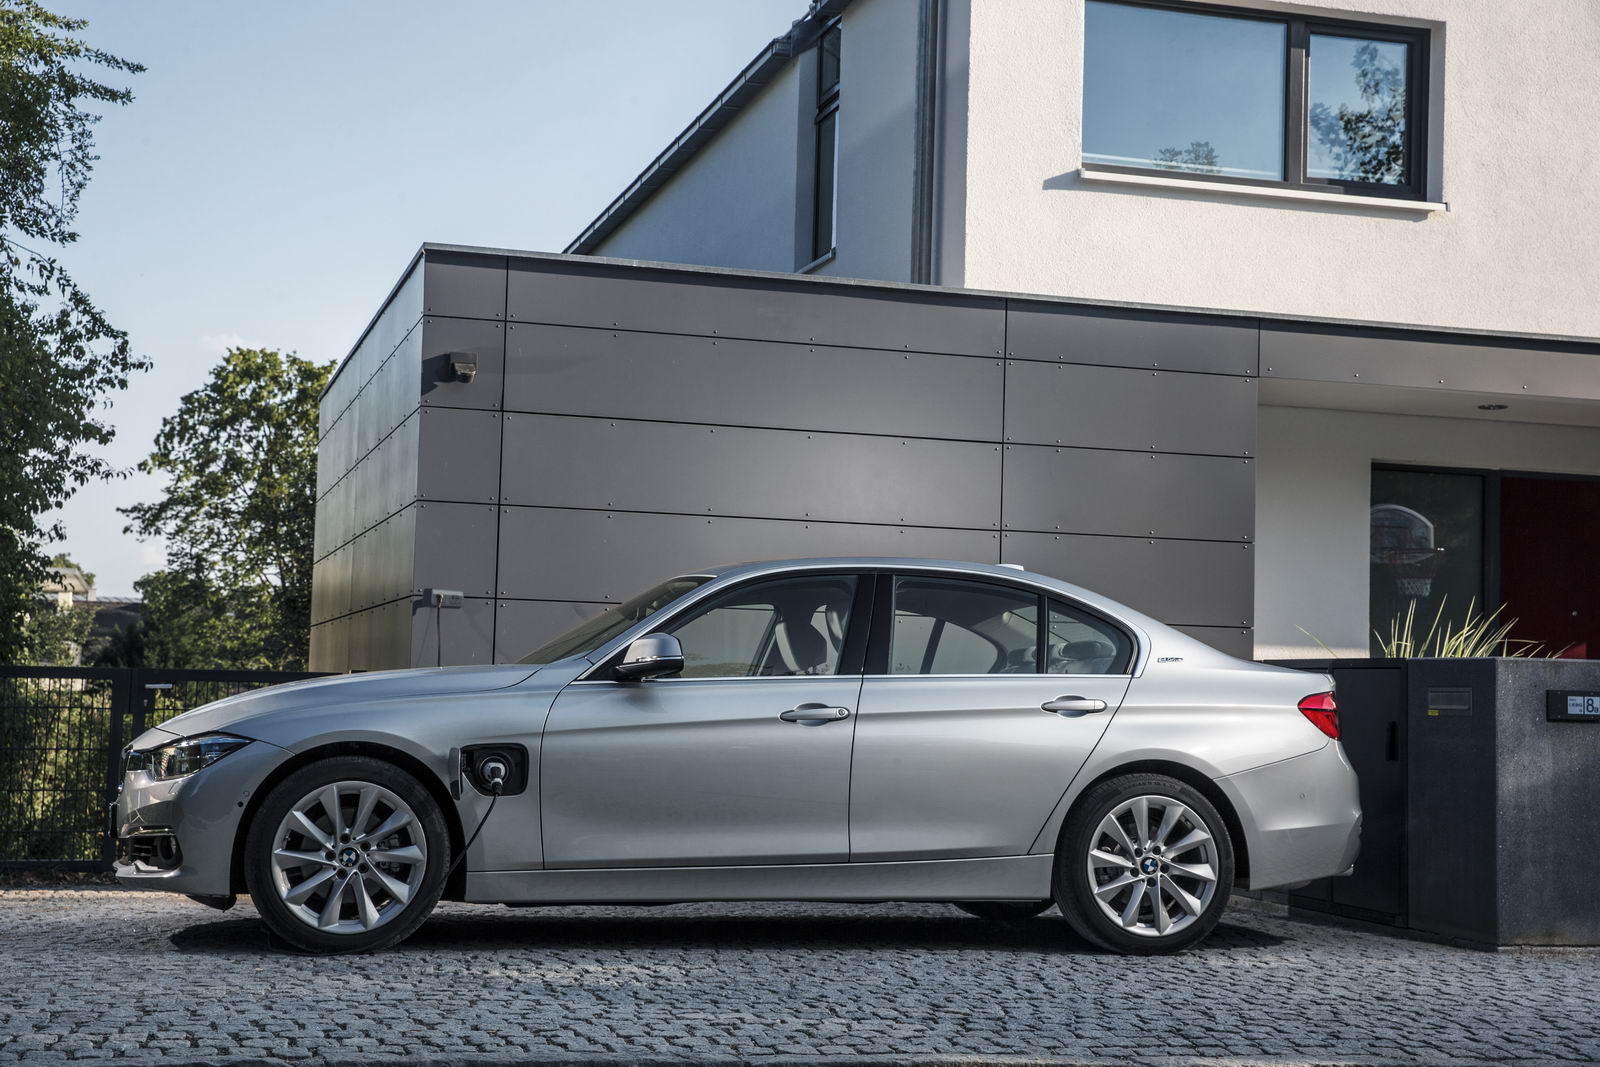 BMW 330e PHEV unveiled, has a pure-electric range of 40 km